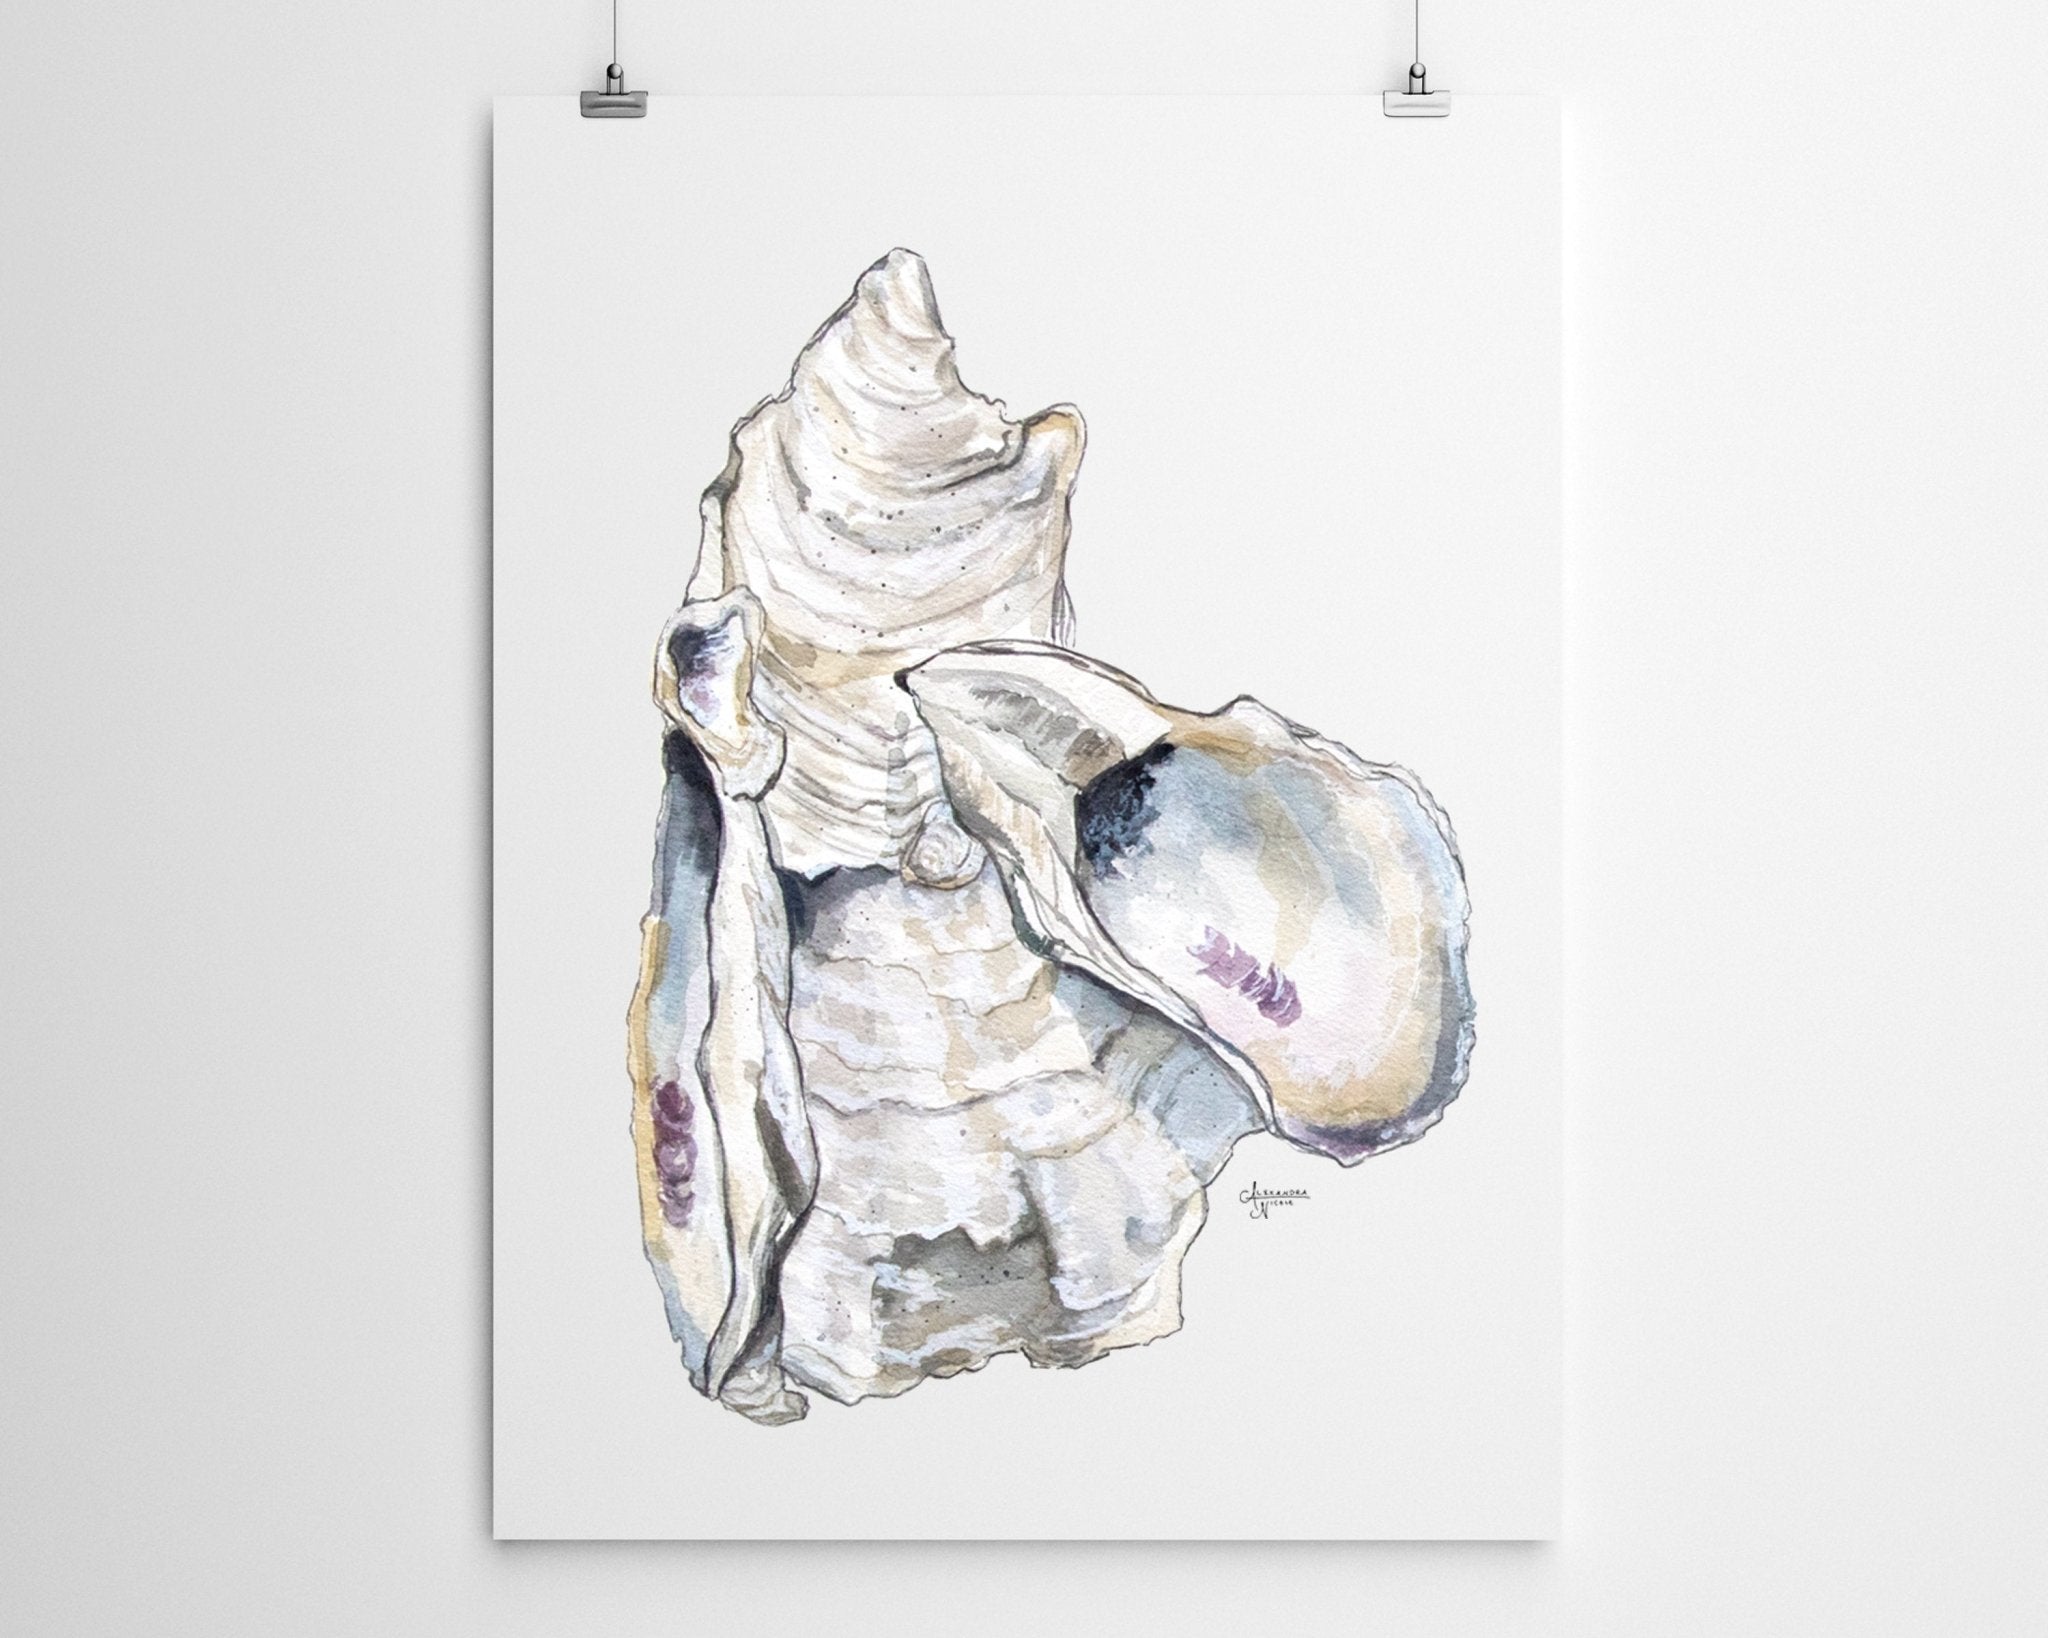 Oyster Cluster Watercolor Discounted Print Set of 3 - ArtByAlexandraNicole